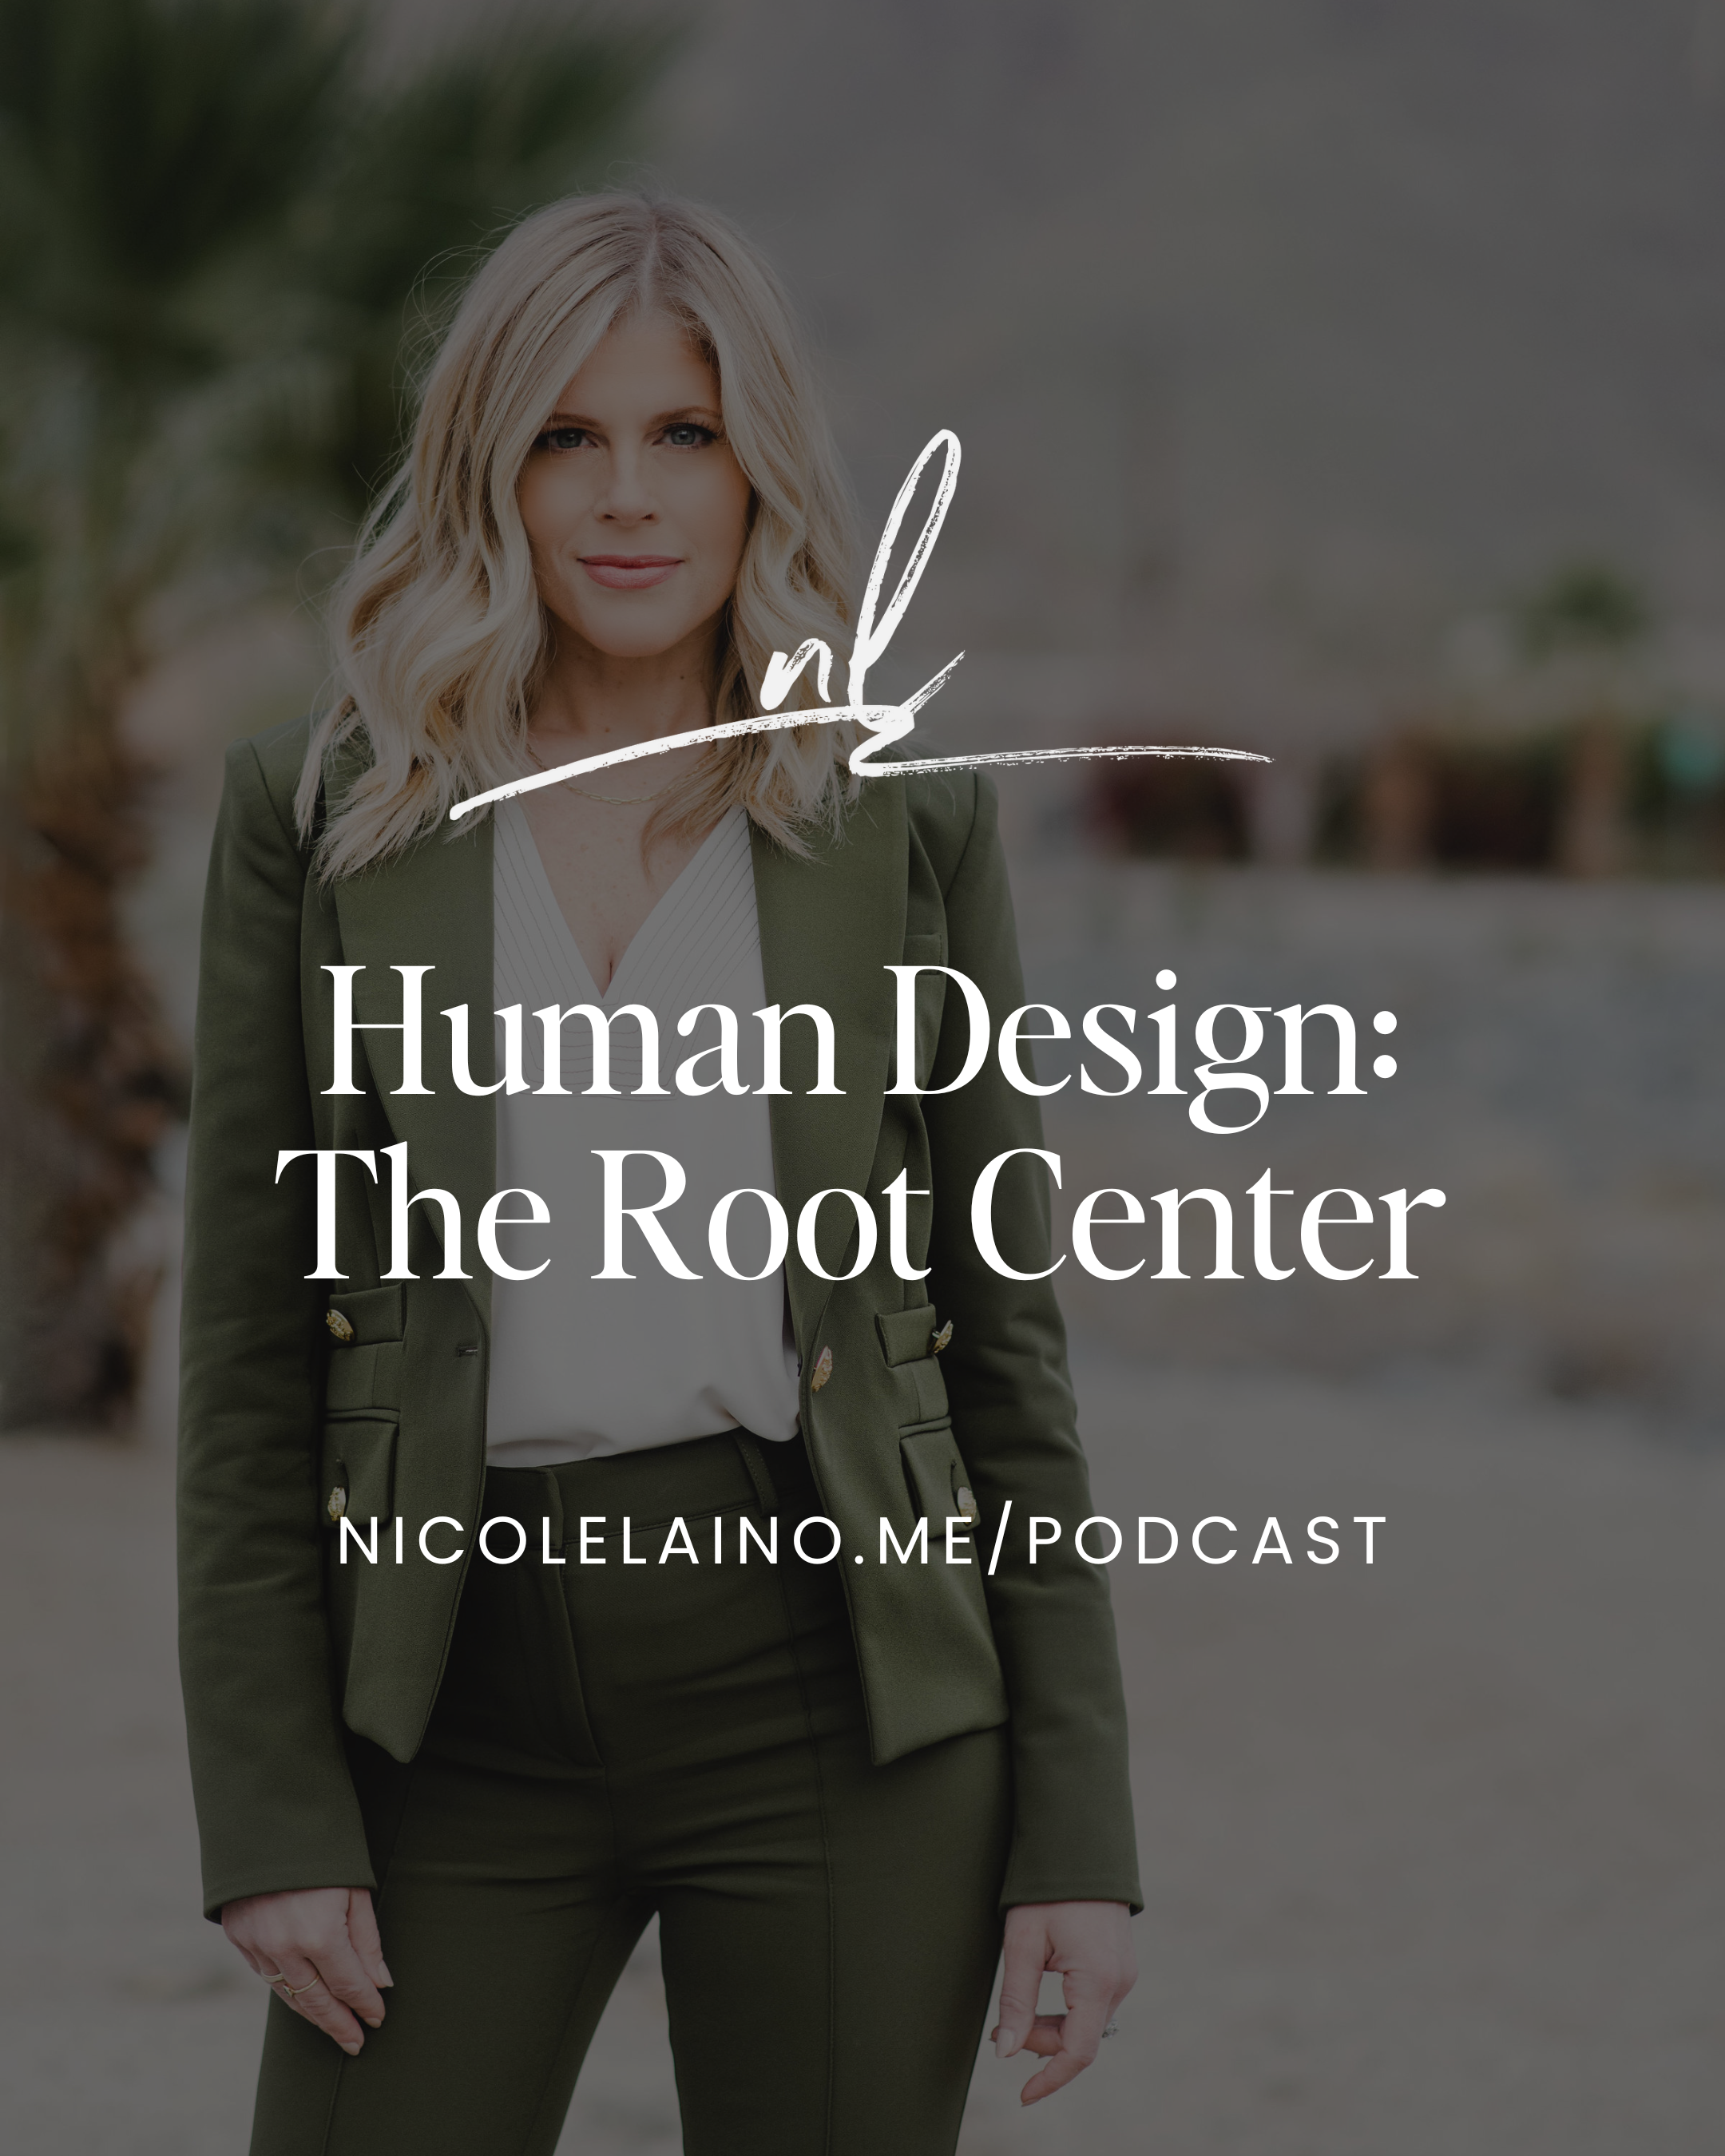 Human Design: The Root Center